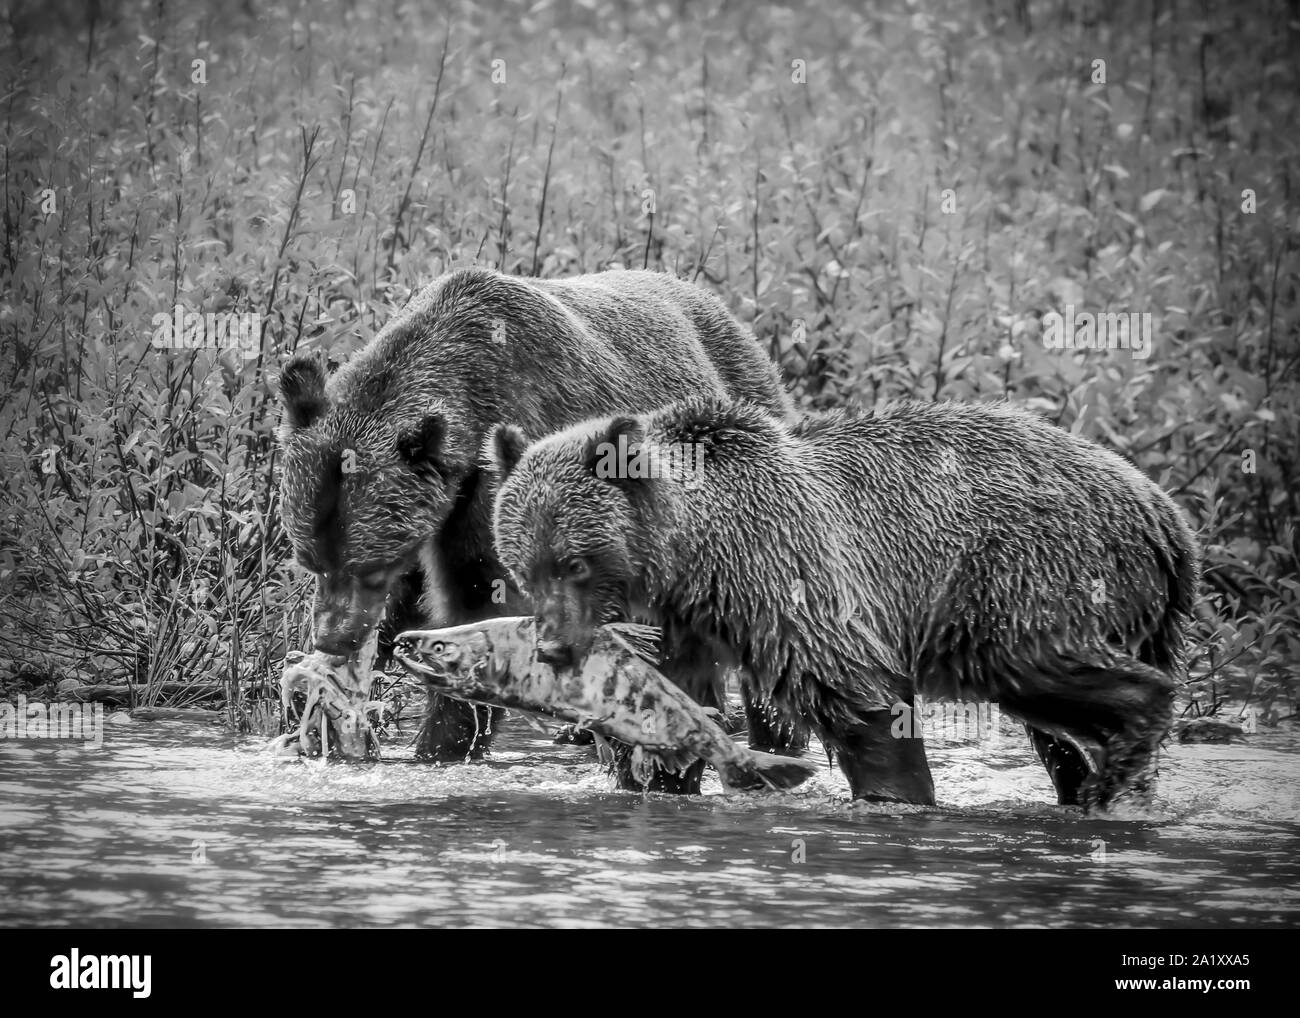 Two Grizzly Bears eating Salmon that they've caught in the river. The image is in black and white Stock Photo